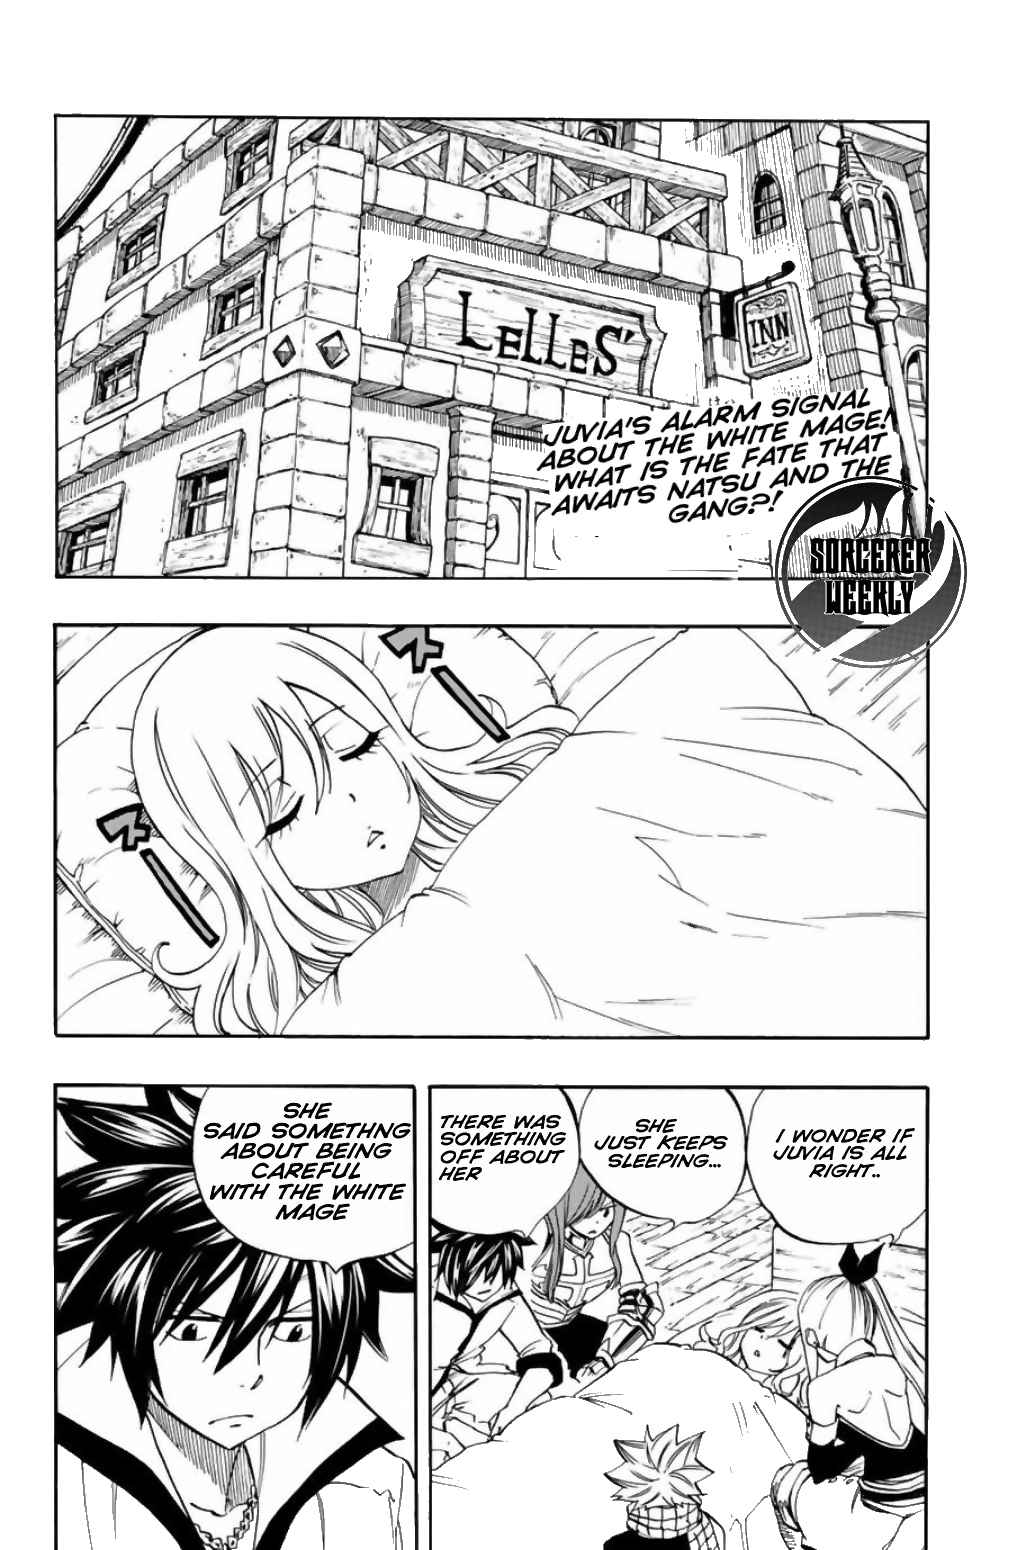 Fairy Tail: 100 Years Quest Ch. 28 White Domination